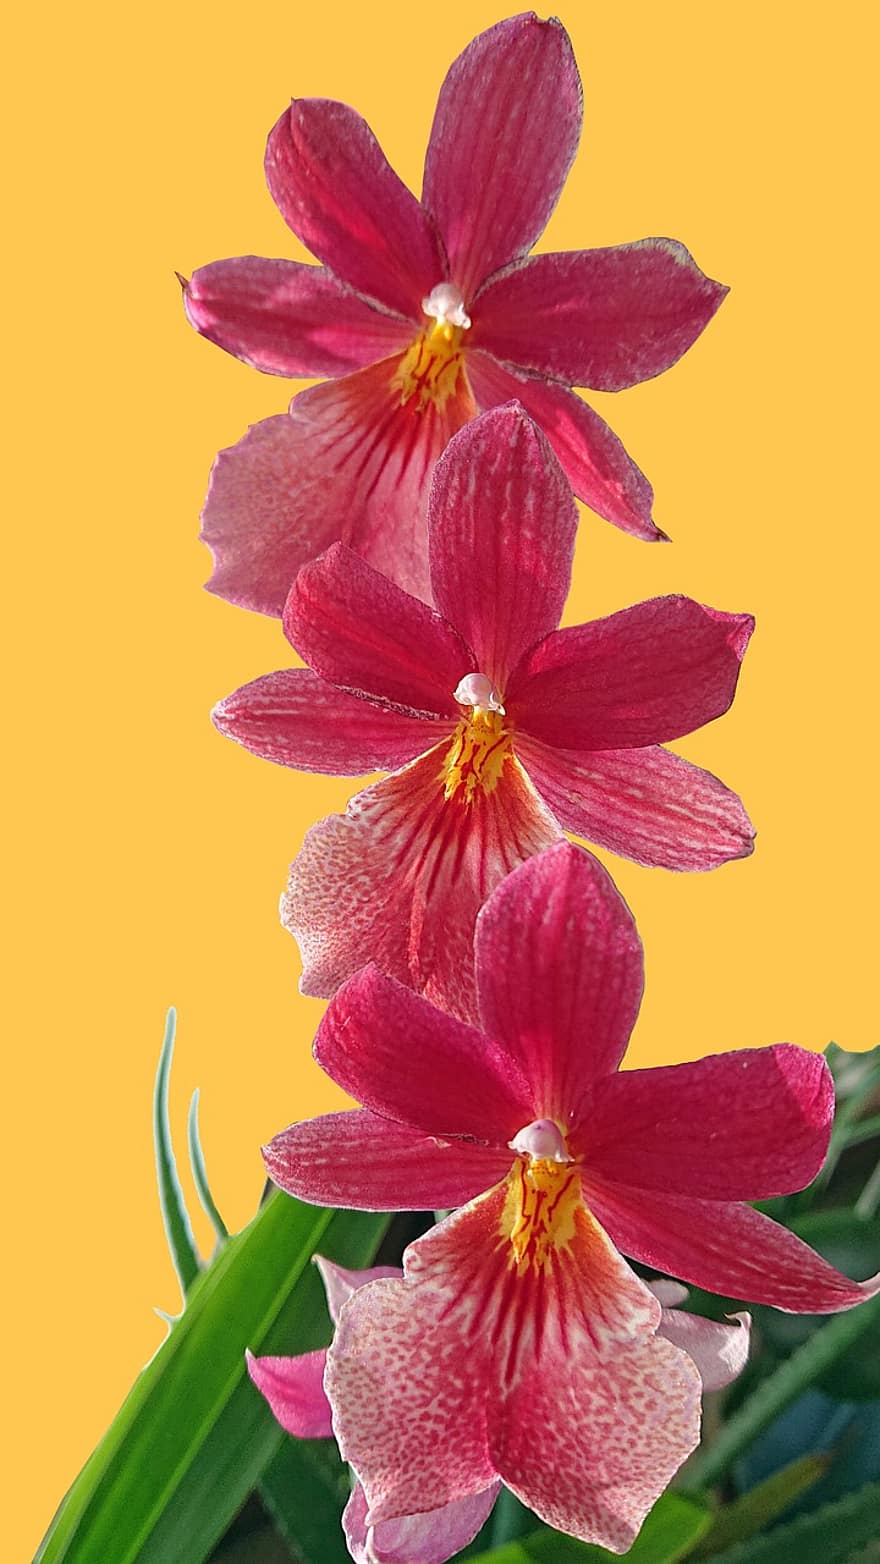 Flowers, Orchid, Plant, Red, Houseplant, Potted Plant, Bloom, Nature, Blossom, Growth, close-up